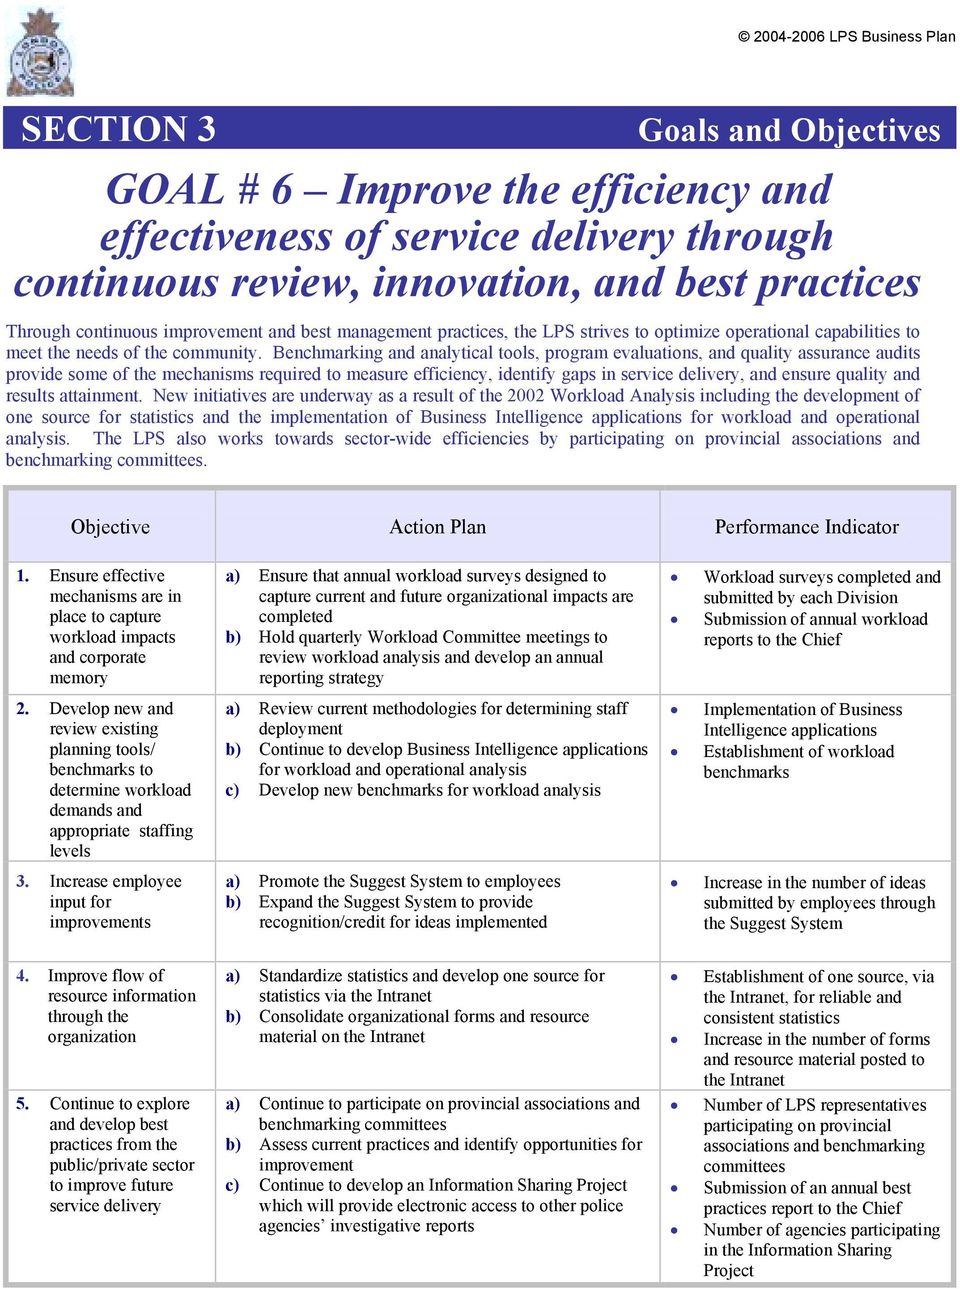 Benchmarking and analytical tools, program evaluations, and quality assurance audits provide some of the mechanisms required to measure efficiency, identify gaps in service delivery, and ensure